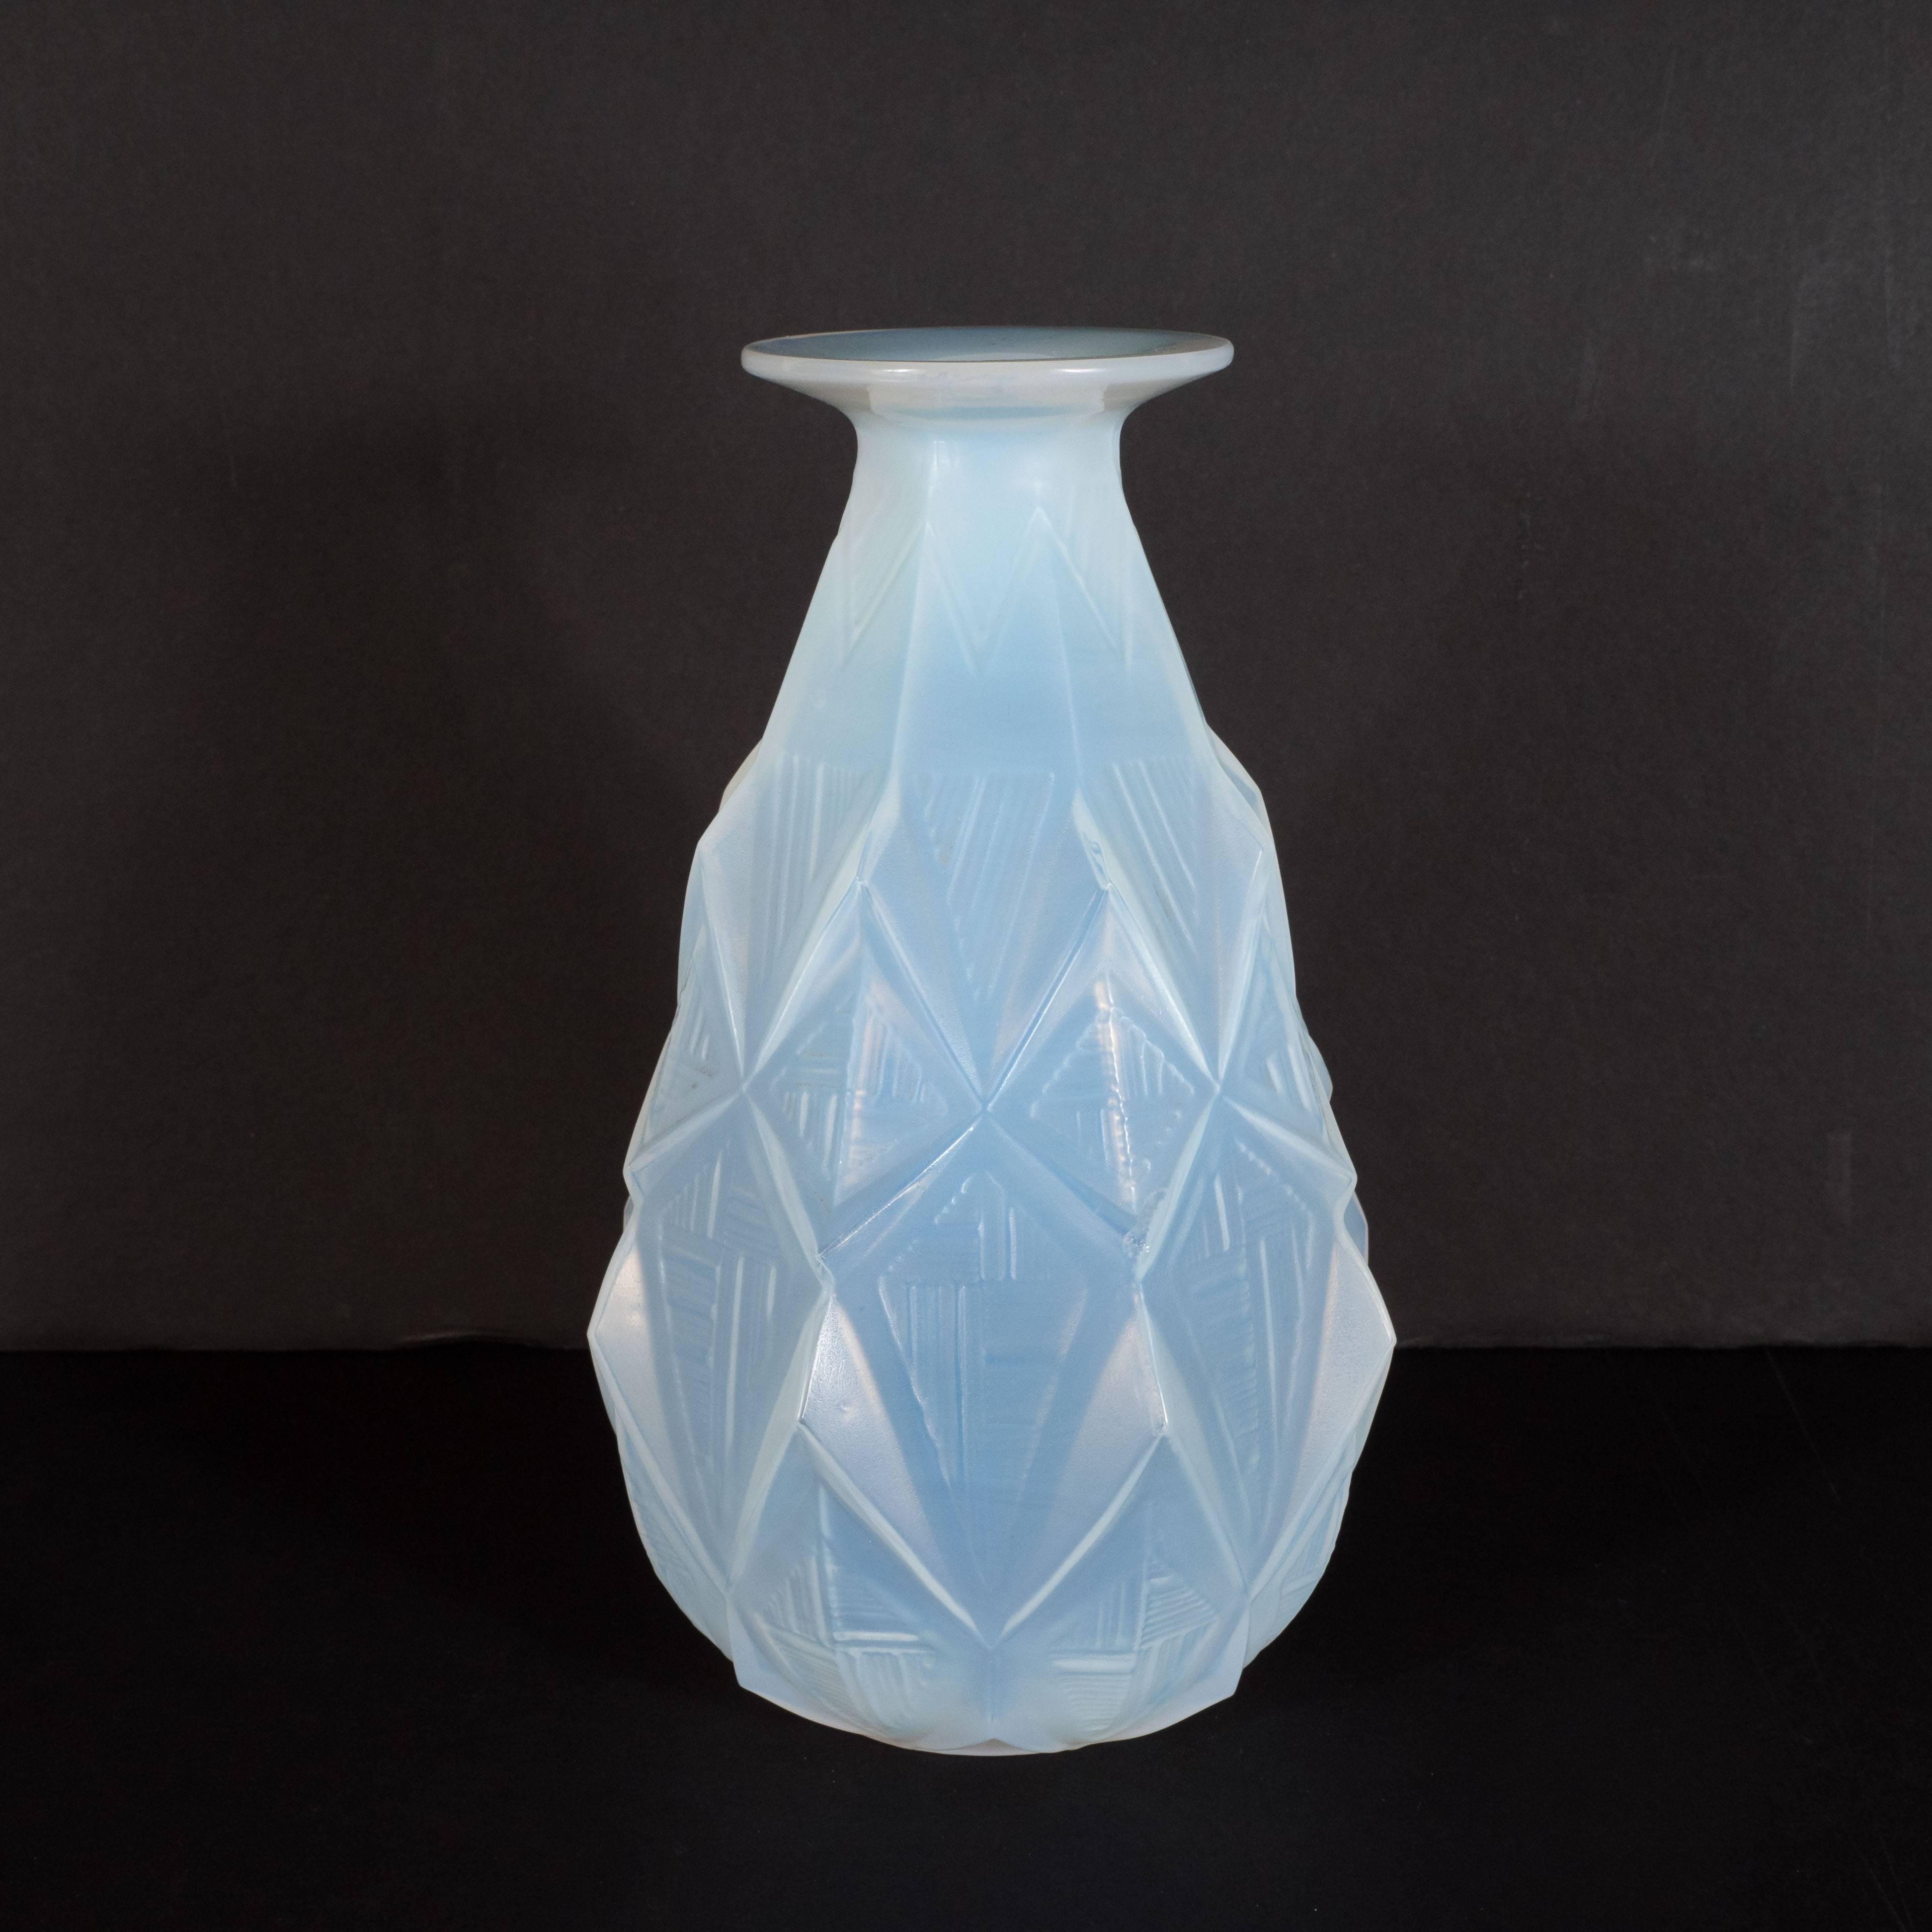 This stunning vase was realized by the illustrious glass blowing atelier, Sabino, in France circa 1930. It features a subtly tapering body that dramatically flares at its mouth, as well as raised rectilinear geometric designs throughout. This is a